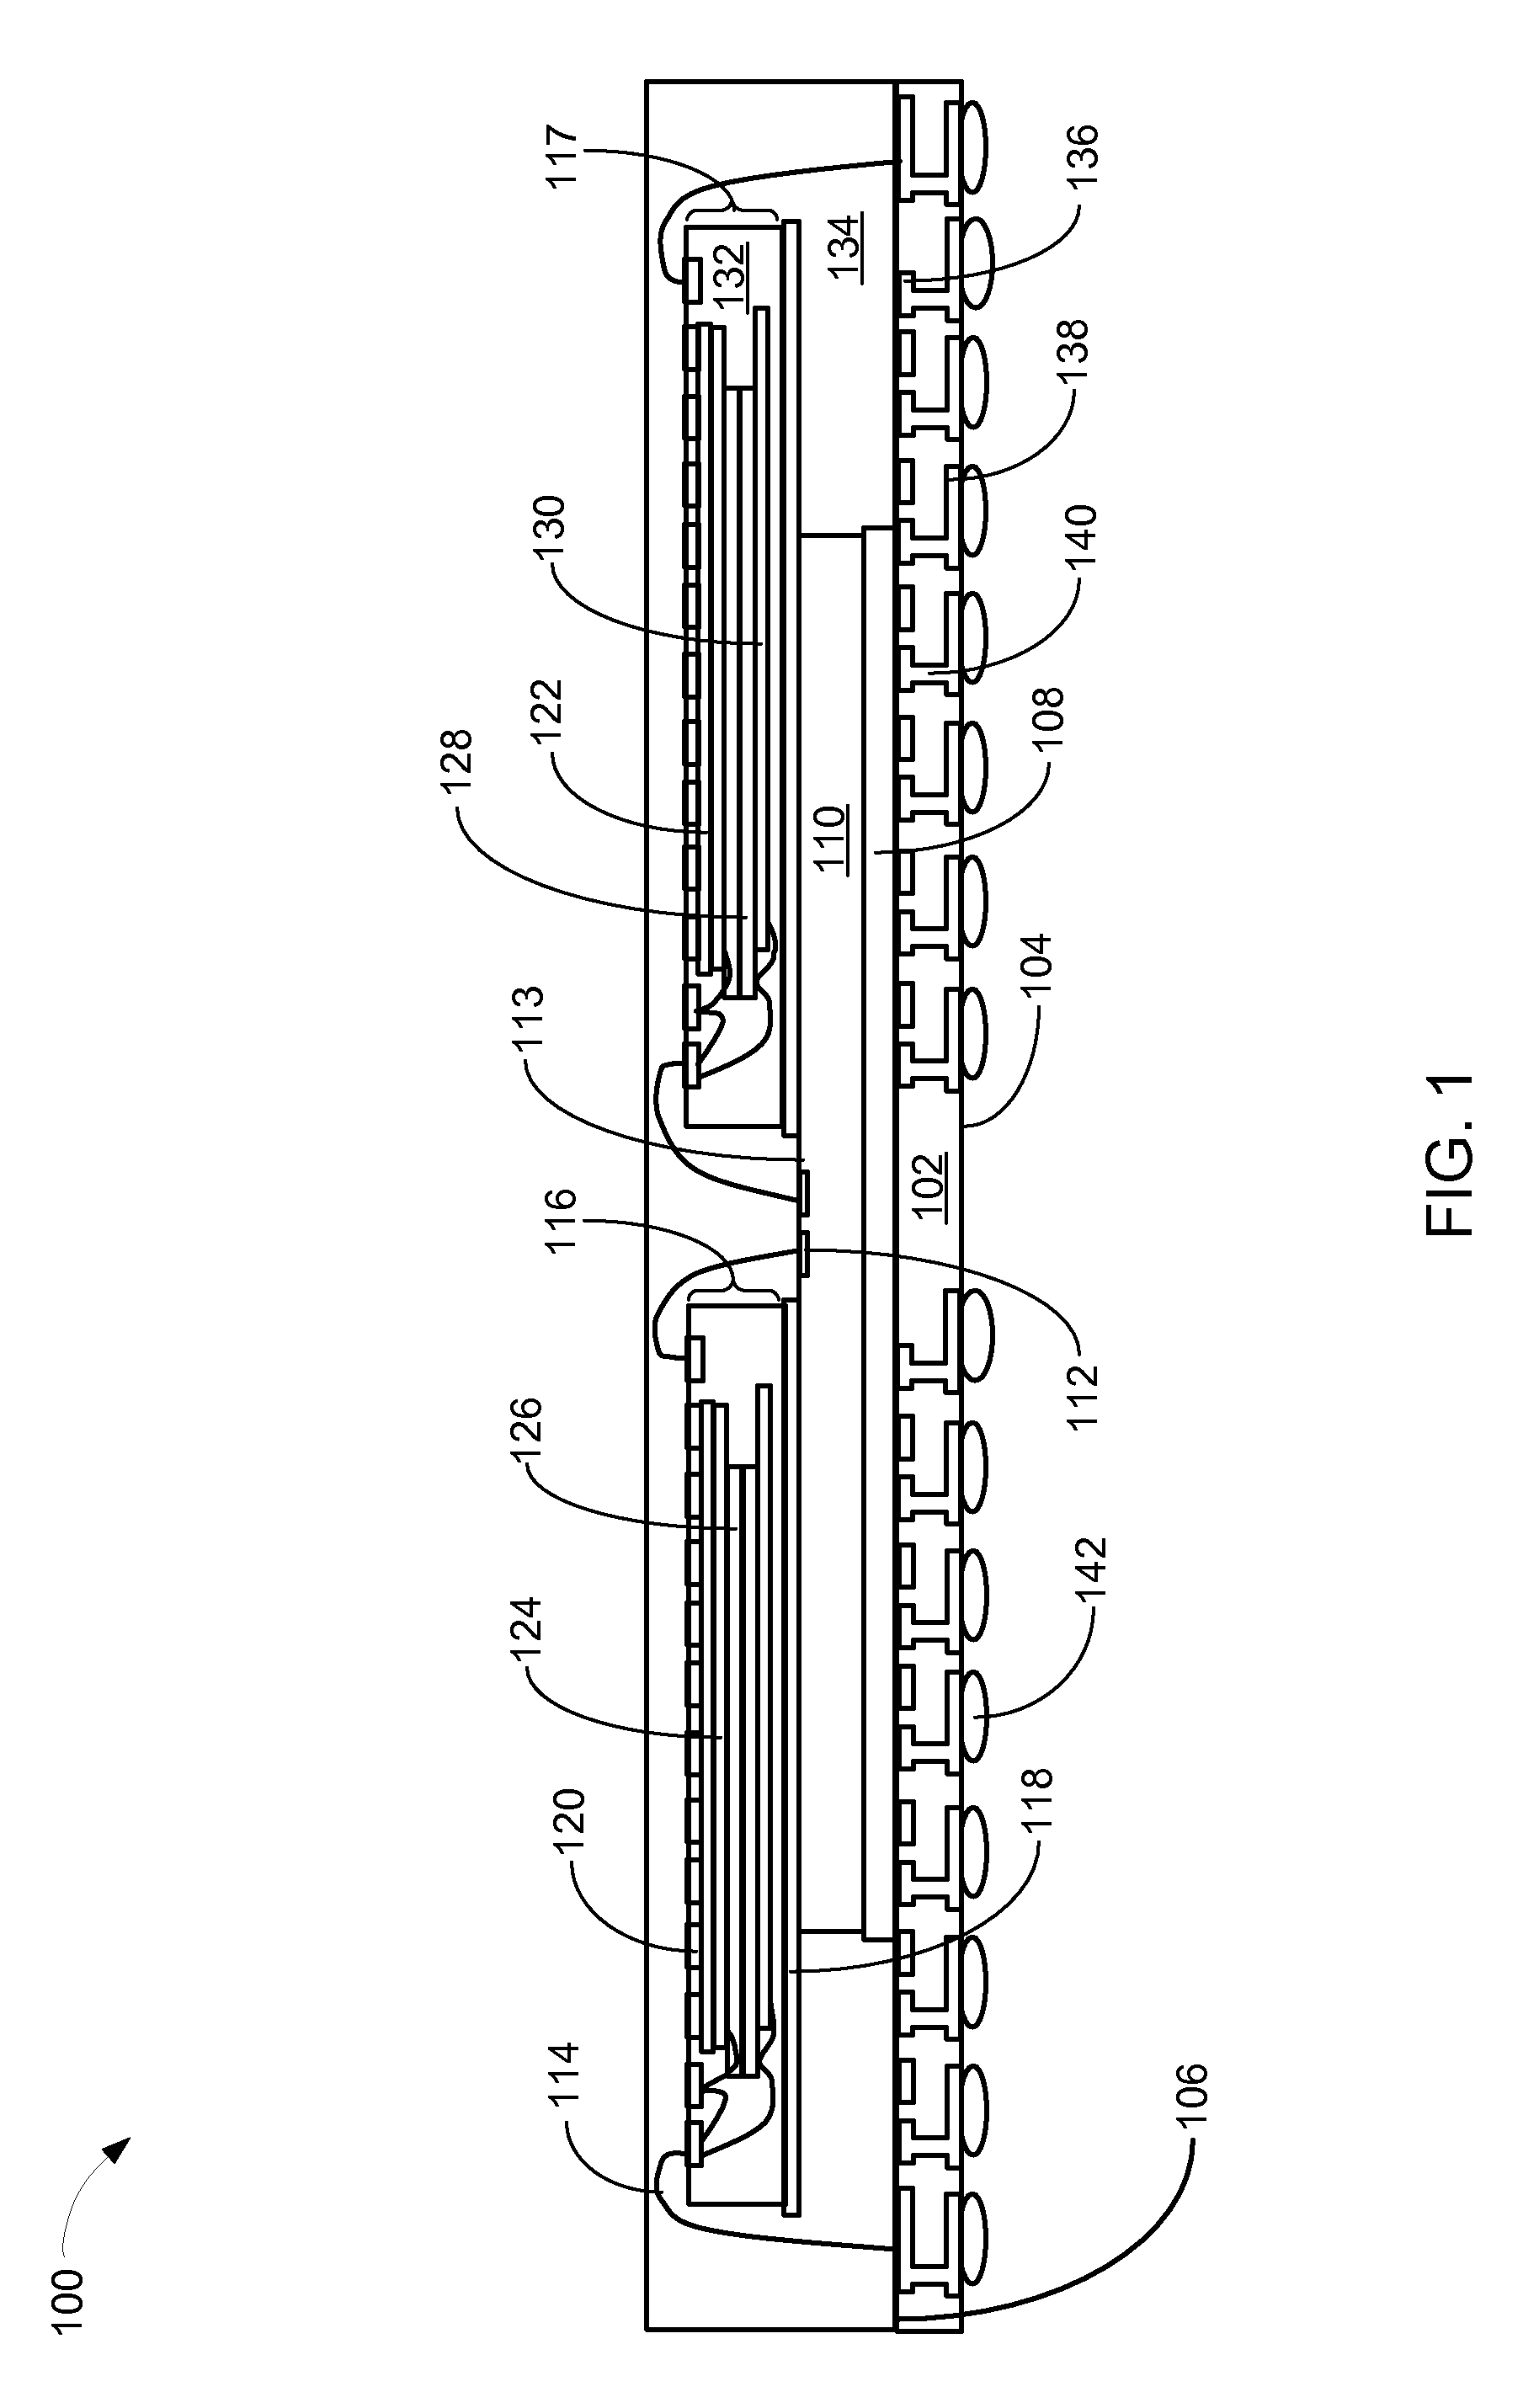 Integrated circuit package system with stacked devices